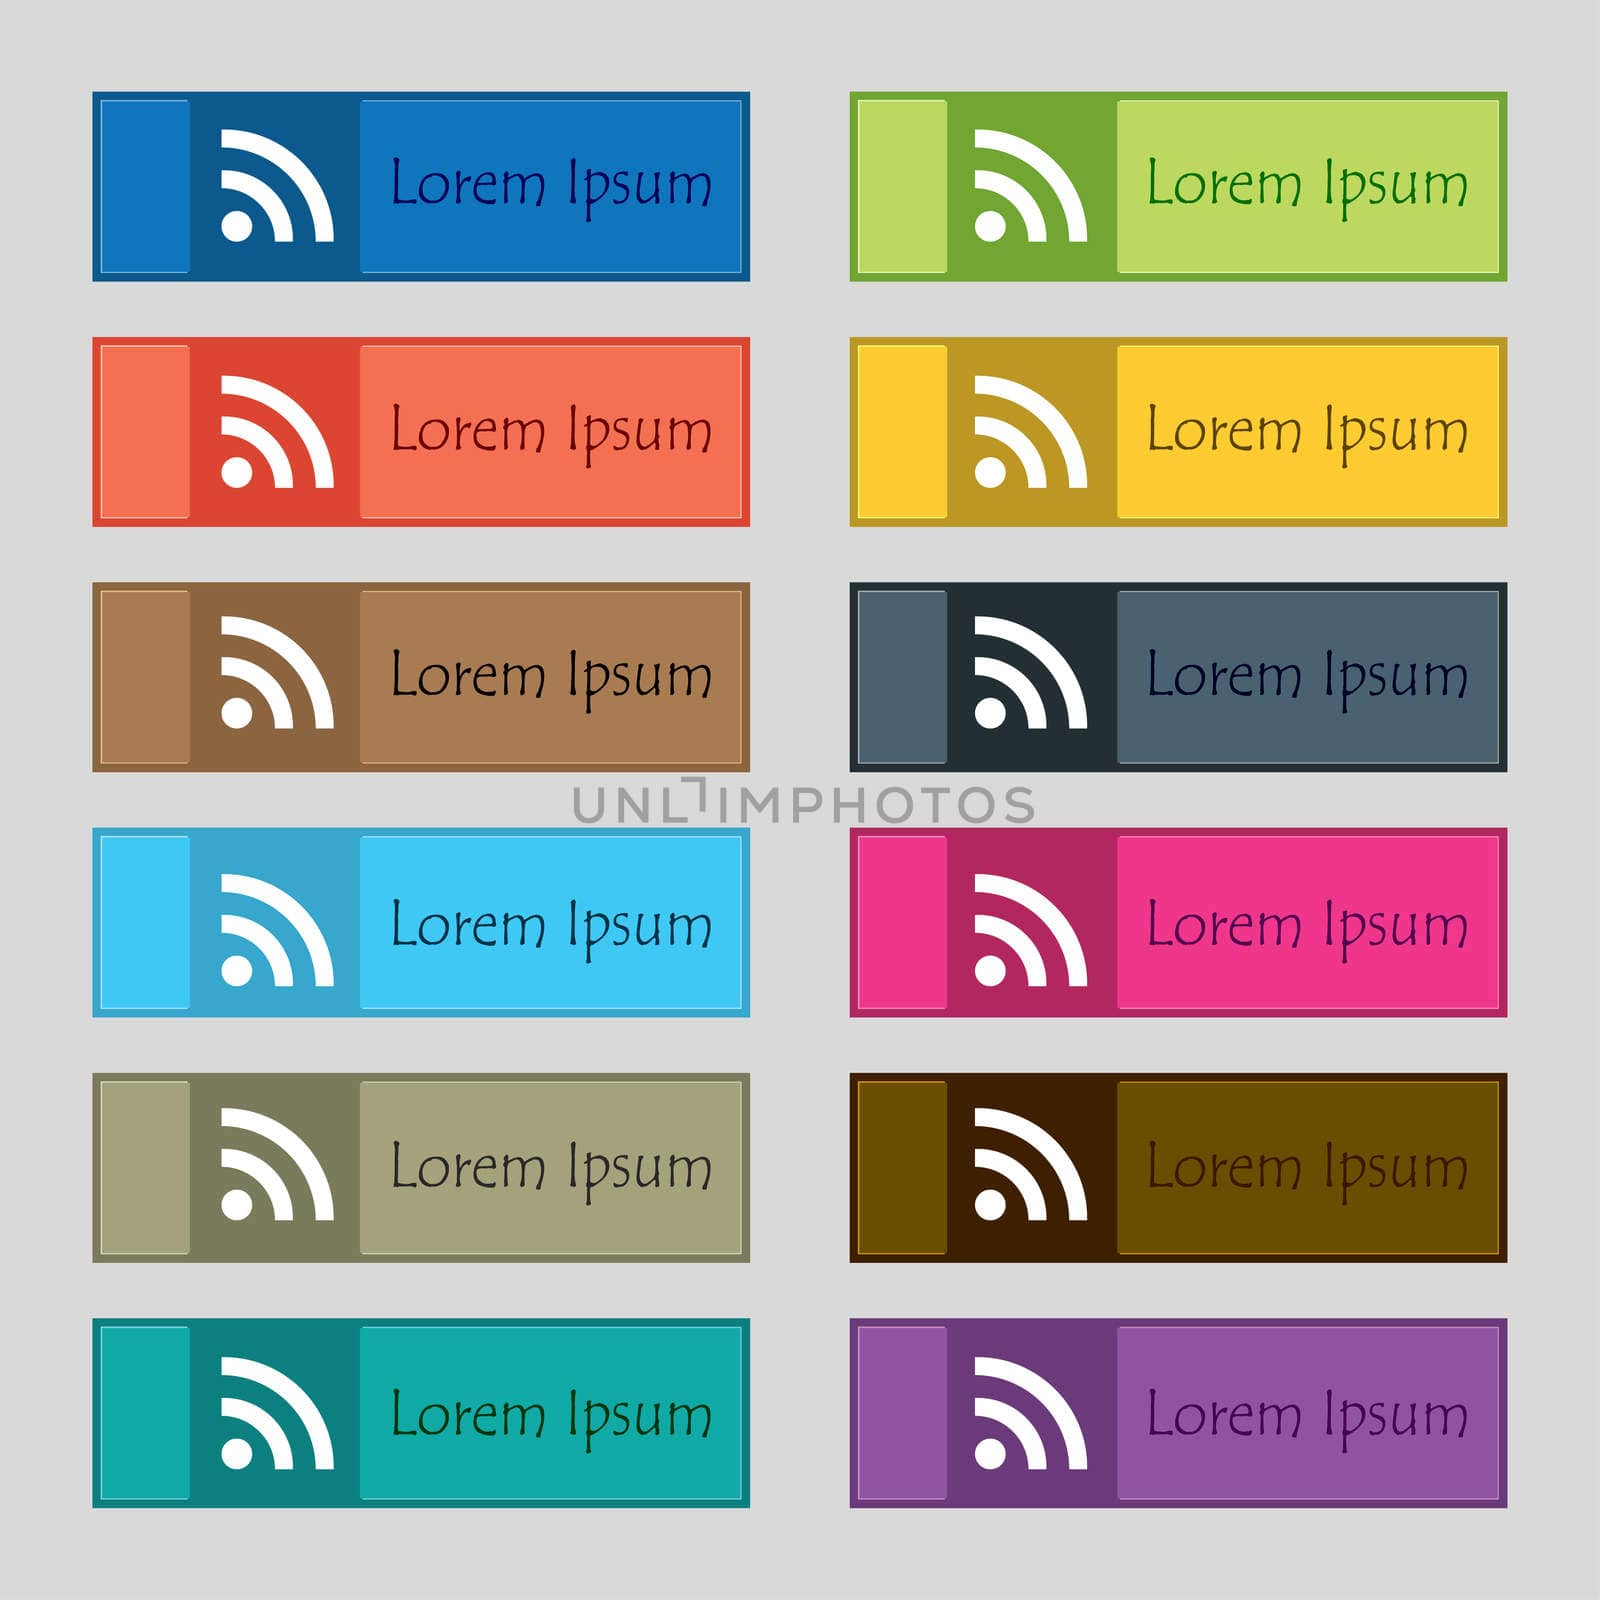 Wifi, Wi-fi, Wireless Network icon sign. Set of twelve rectangular, colorful, beautiful, high-quality buttons for the site. illustration